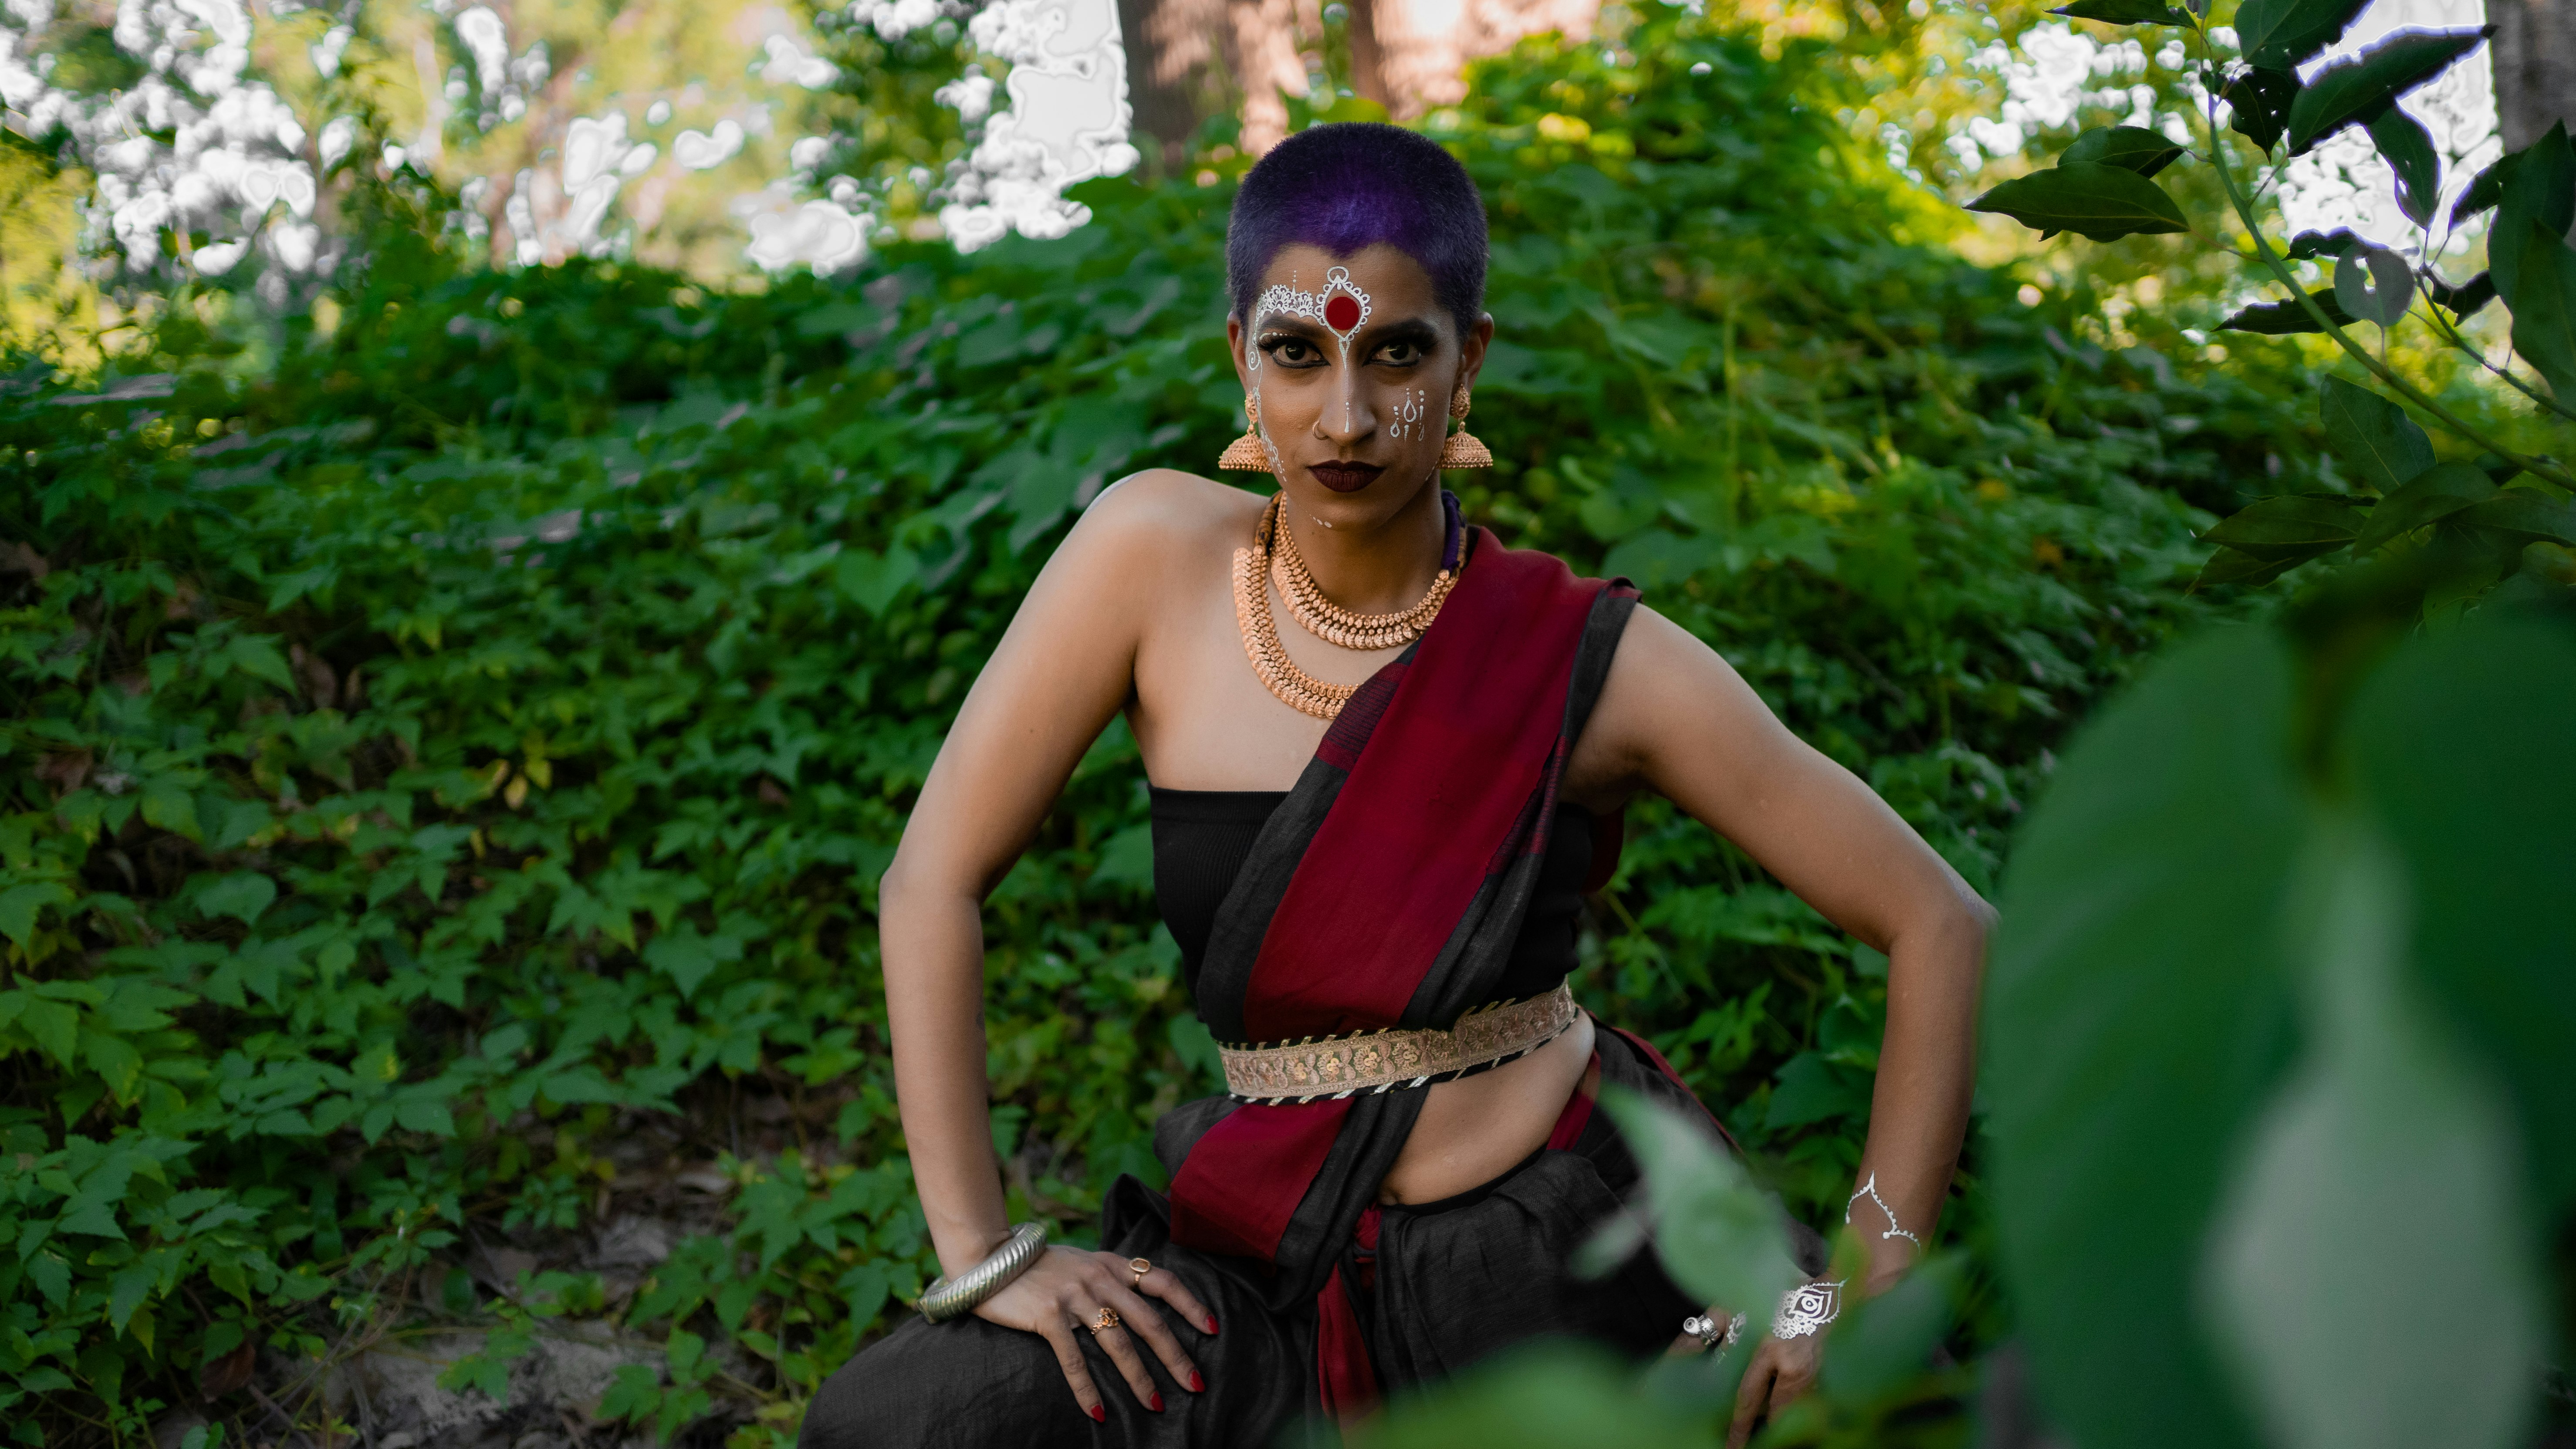 Shyamla is standing mid-movement with their hands on their thighs. They are wearing a strapless top and material draped like a sari over their shulder. They are adorned by gold jewellery, a pottu on their forehead and white mehndi on their face.